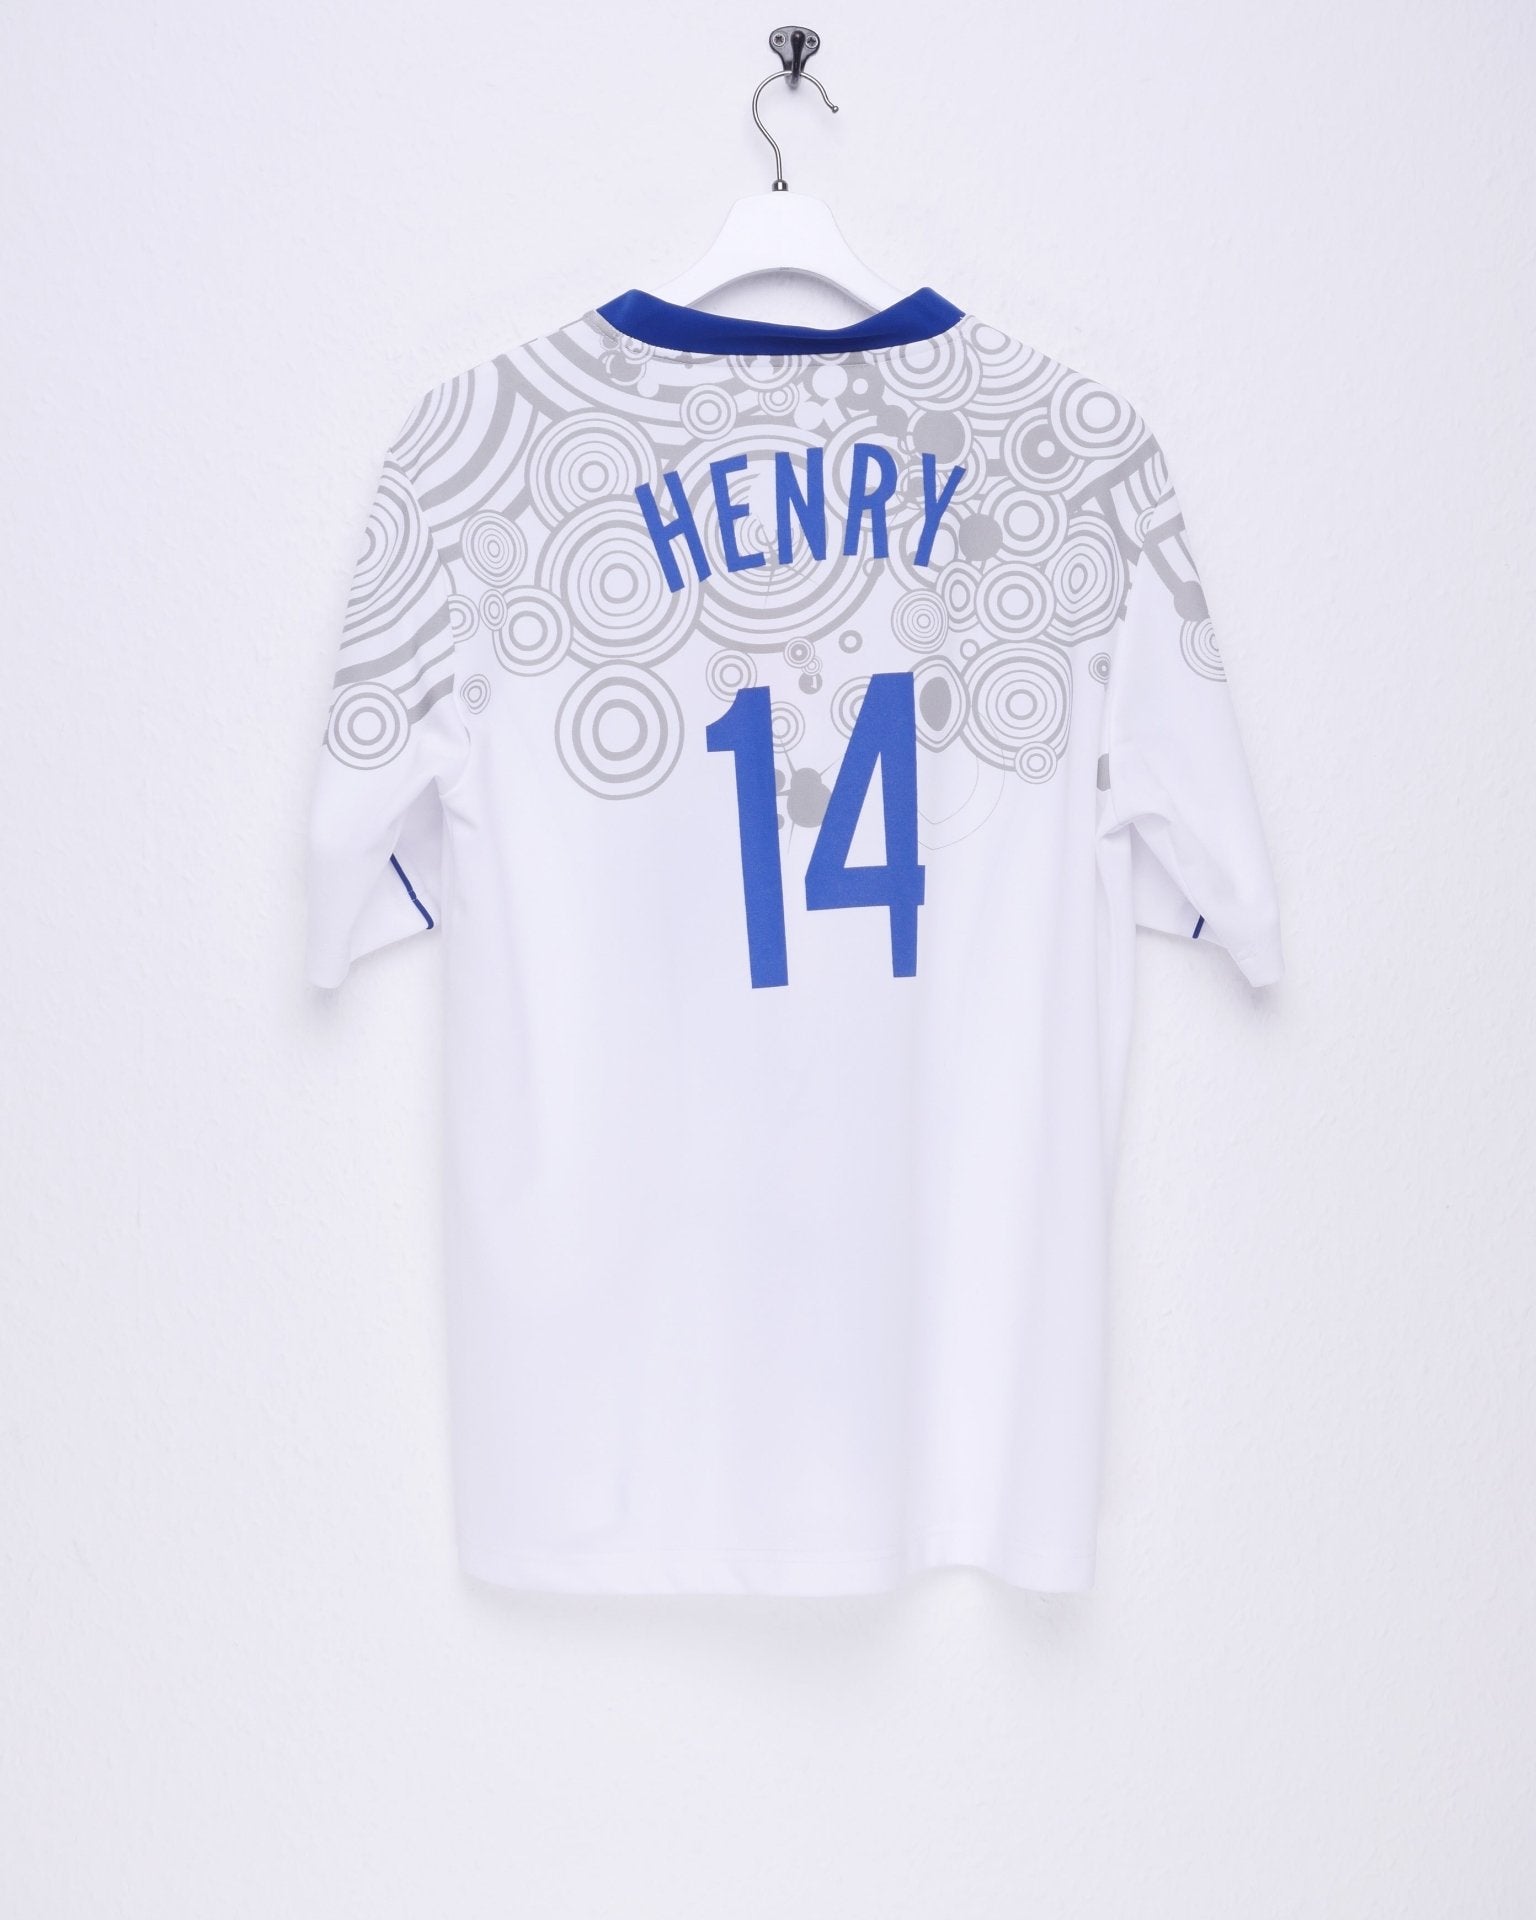 Thierry Henry Pepsi Edition Vintage soccer jersey Shirt - Peeces